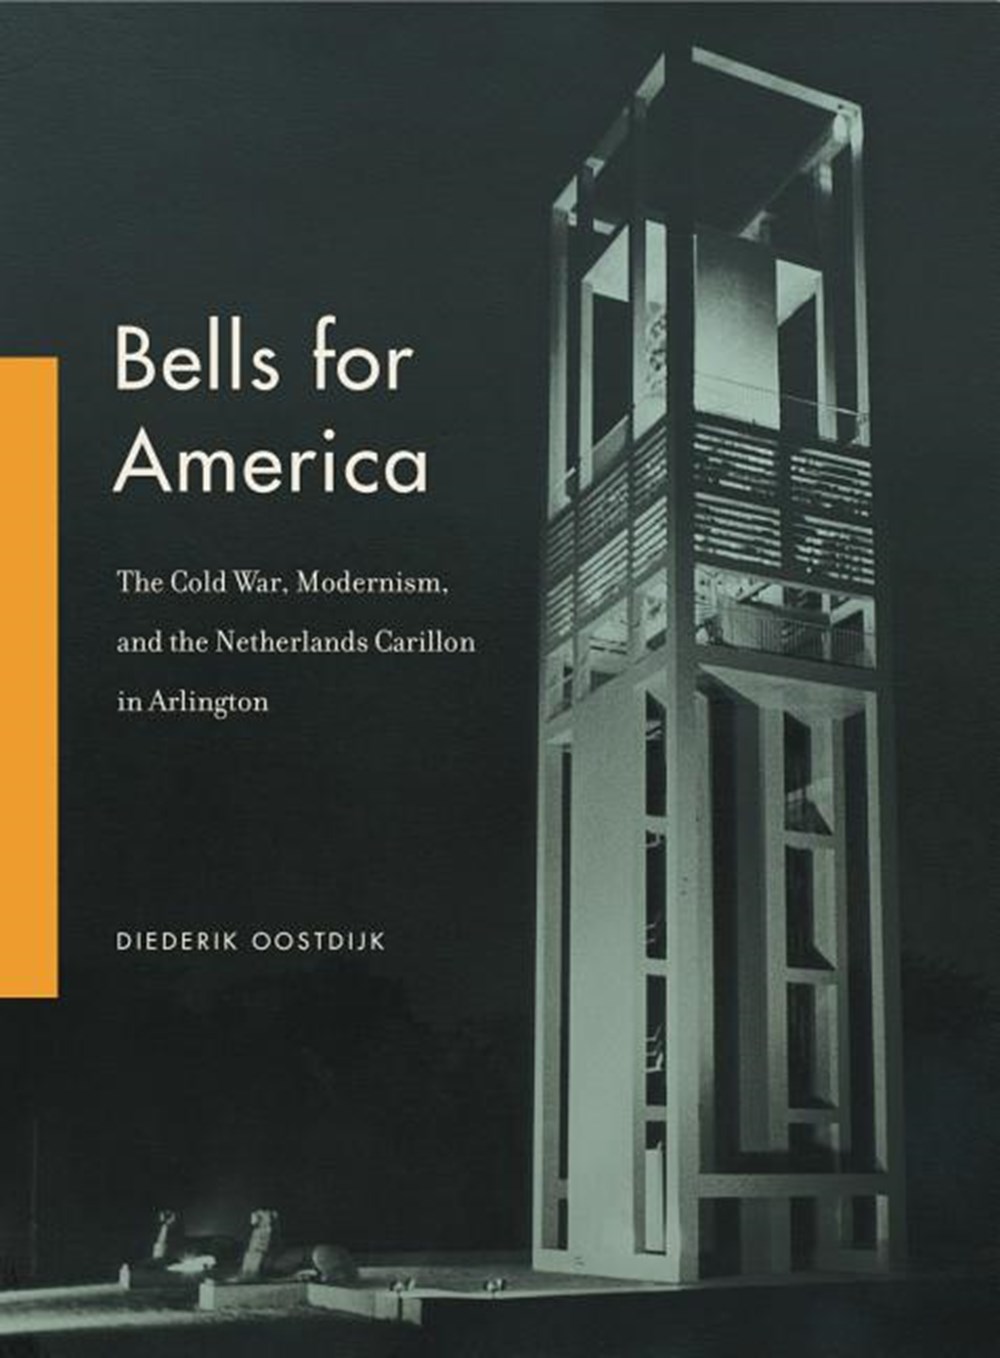 Bells for America: The Cold War, Modernism, and the Netherlands Carillon in Arlington